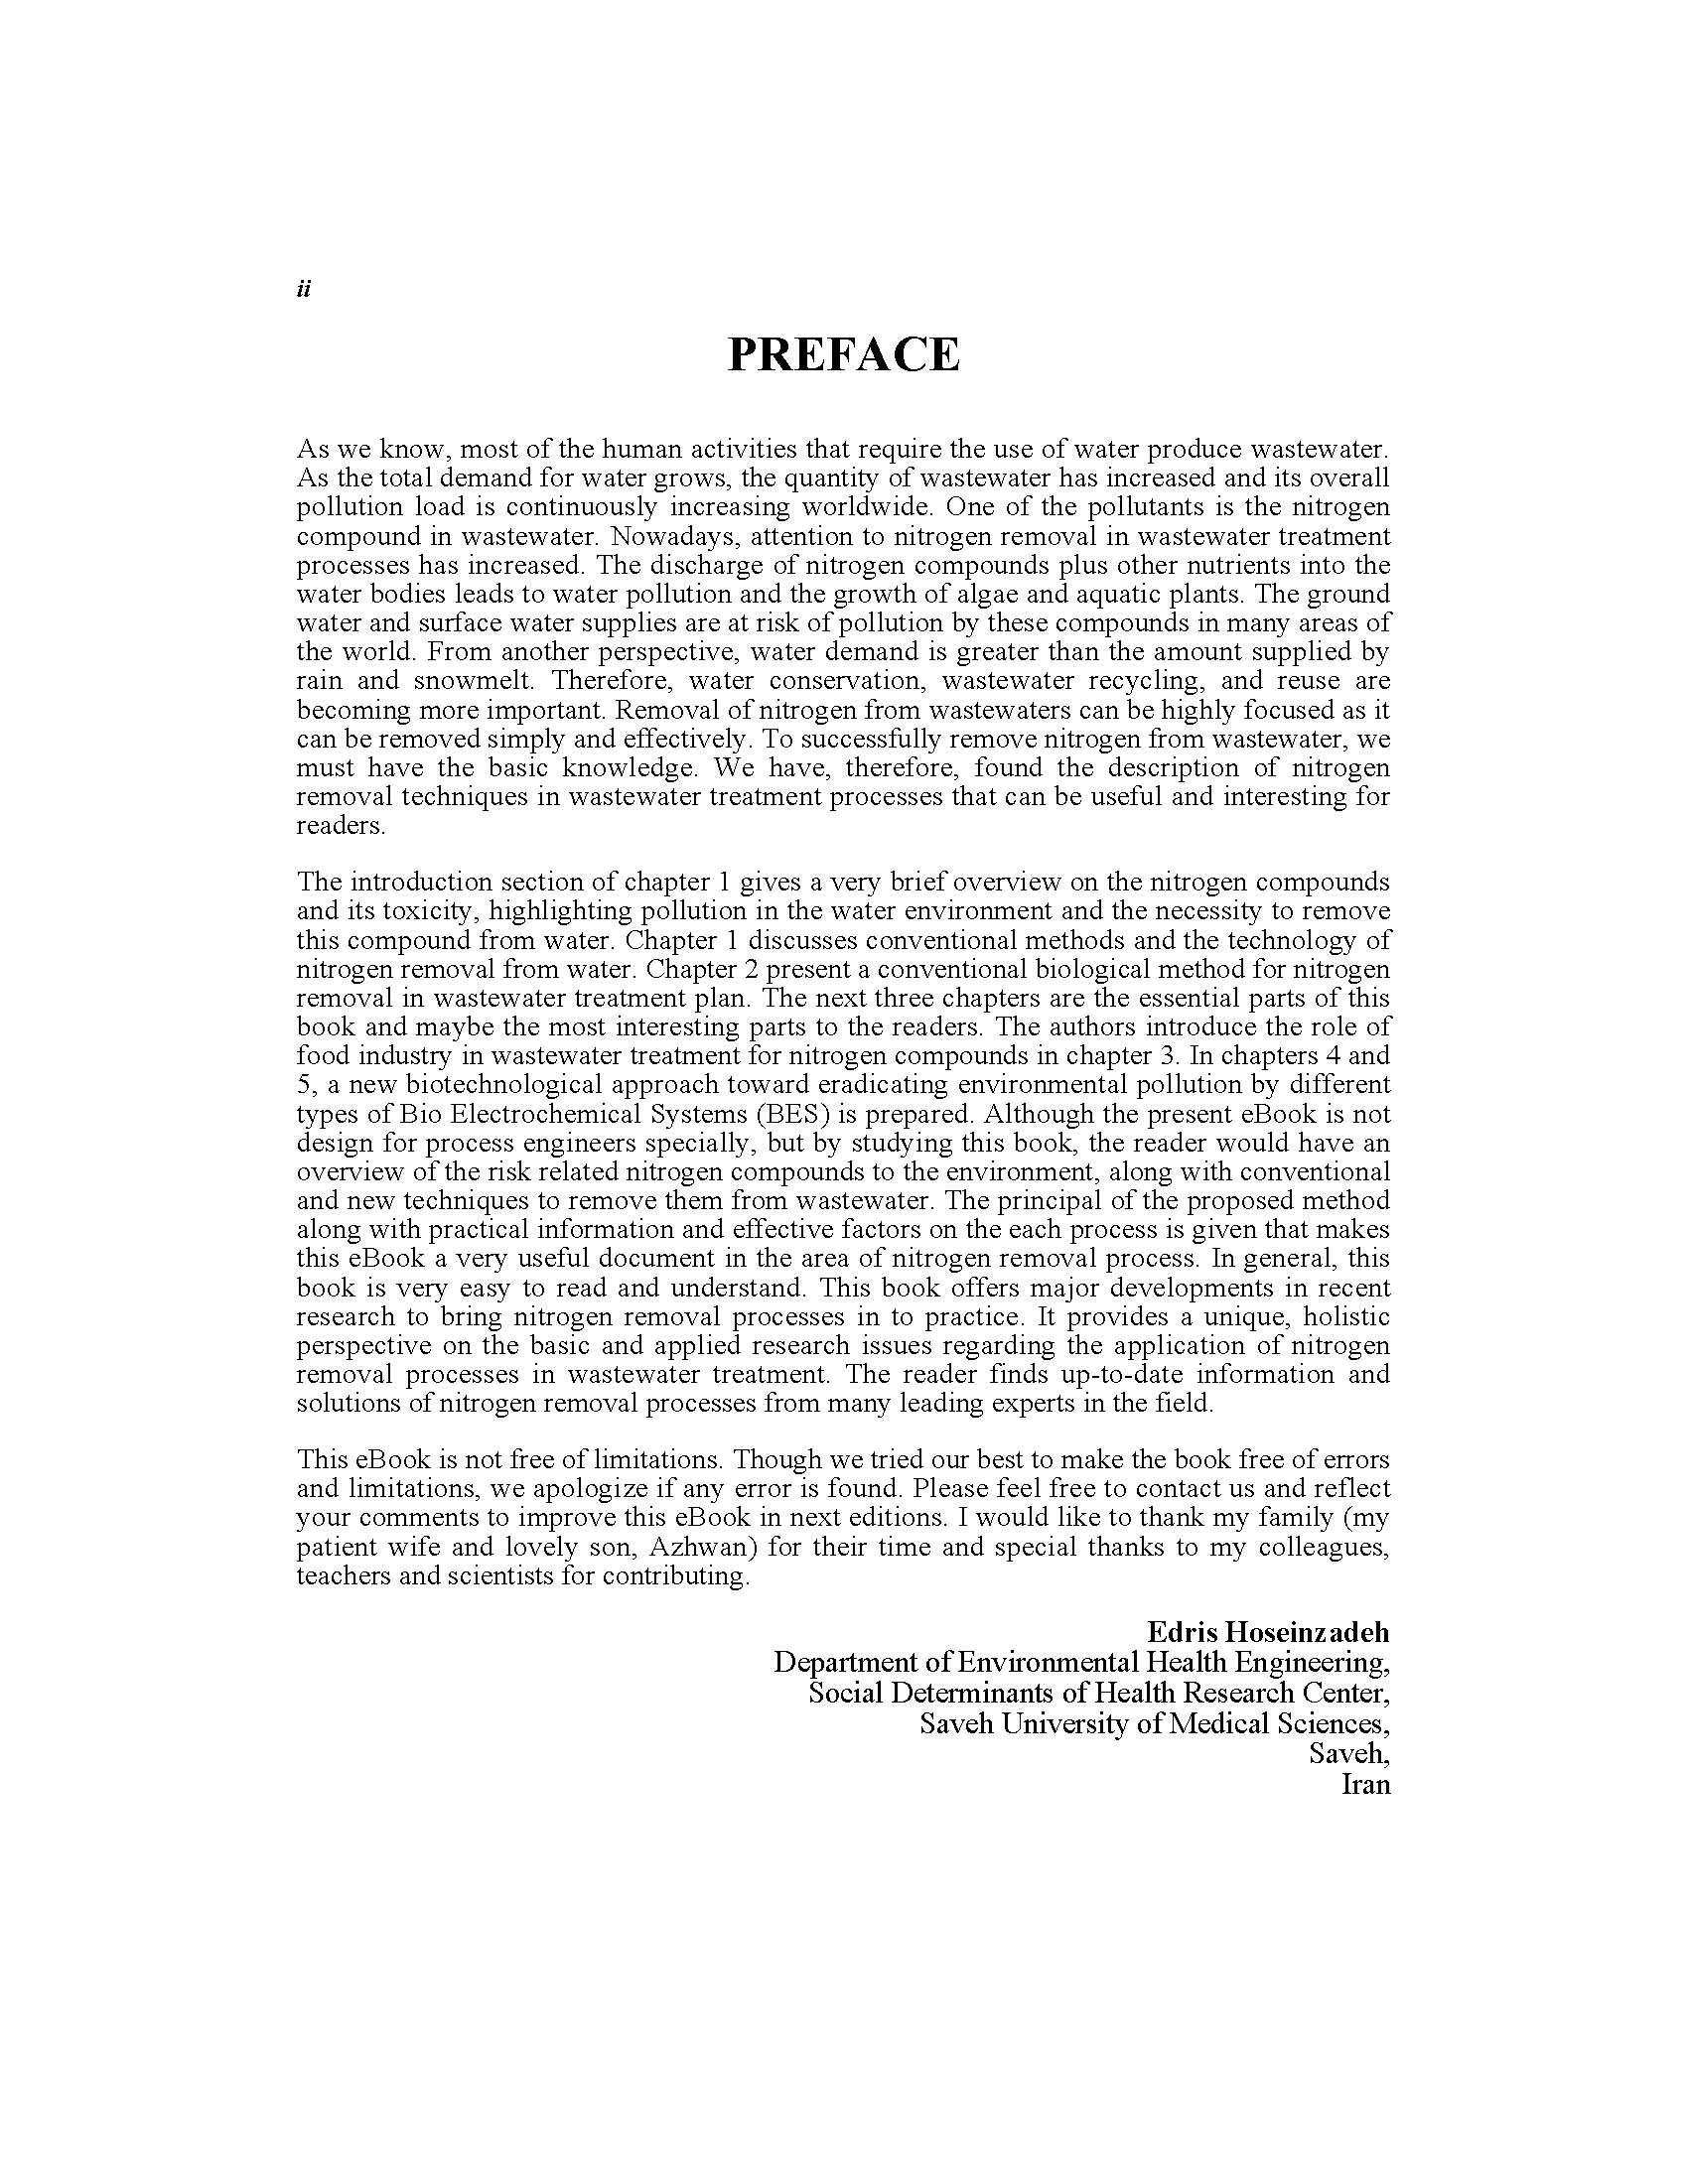 preface doctoral thesis